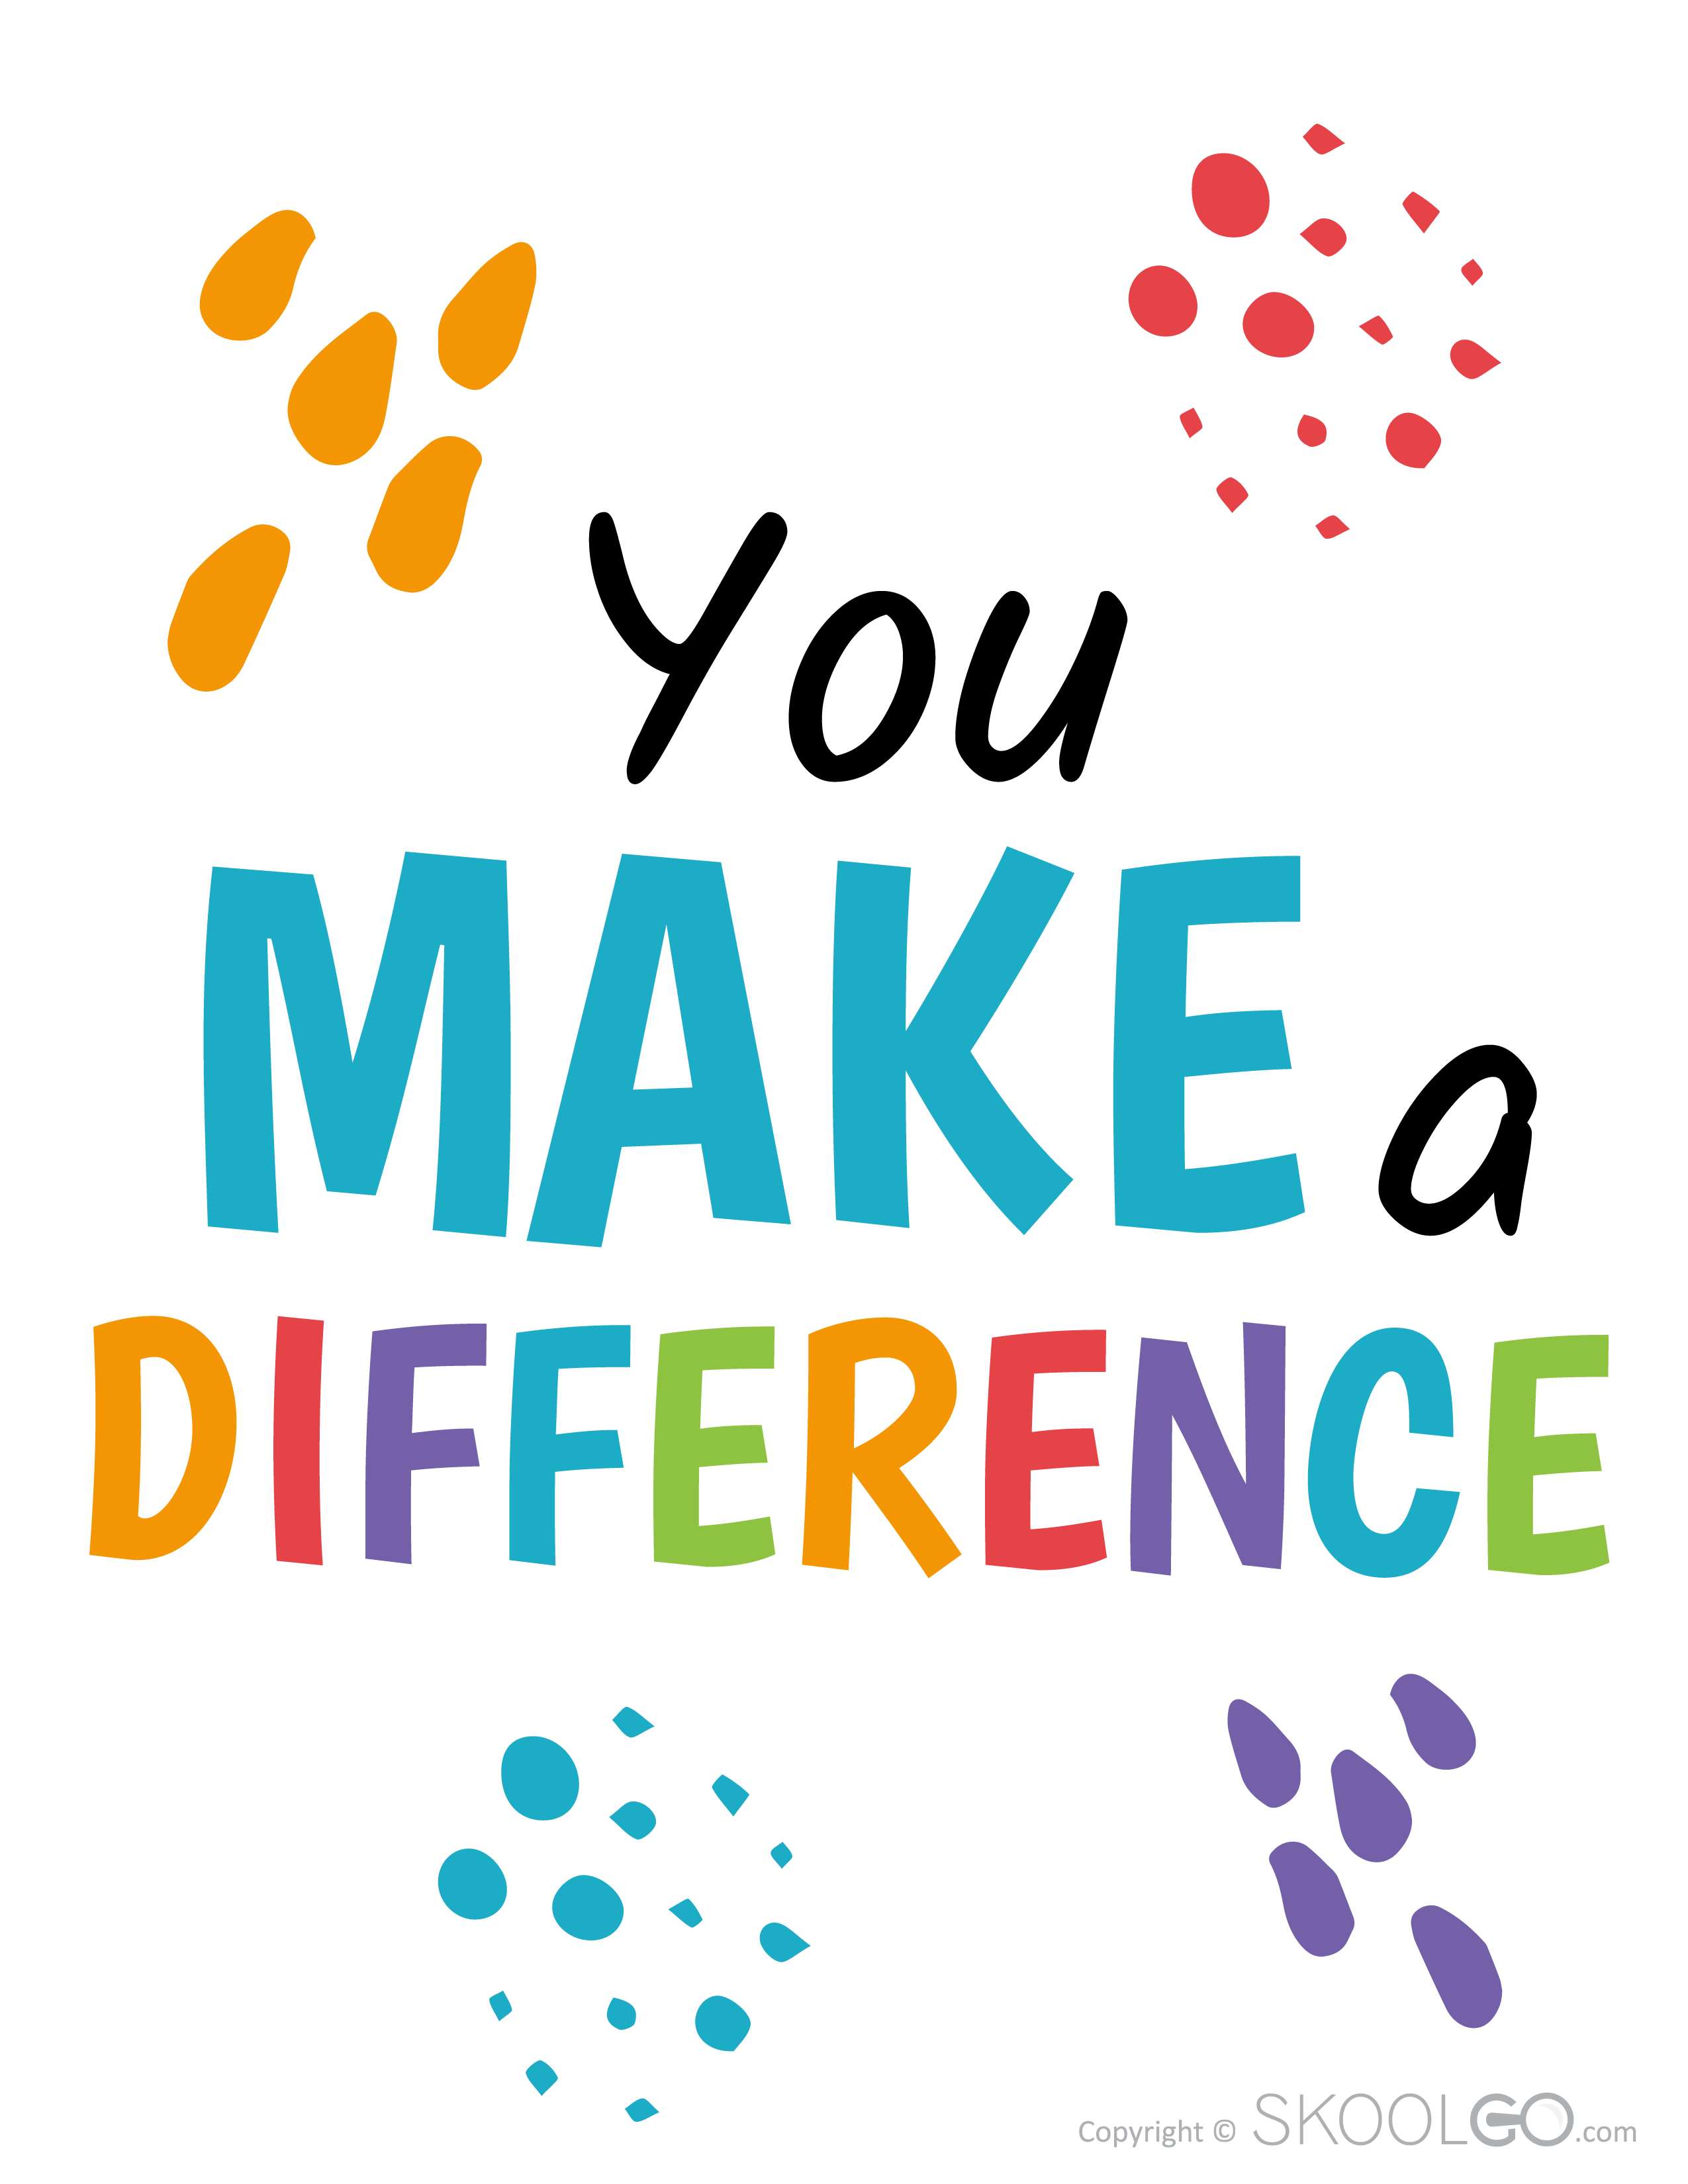 You Make a Difference - Free Poster